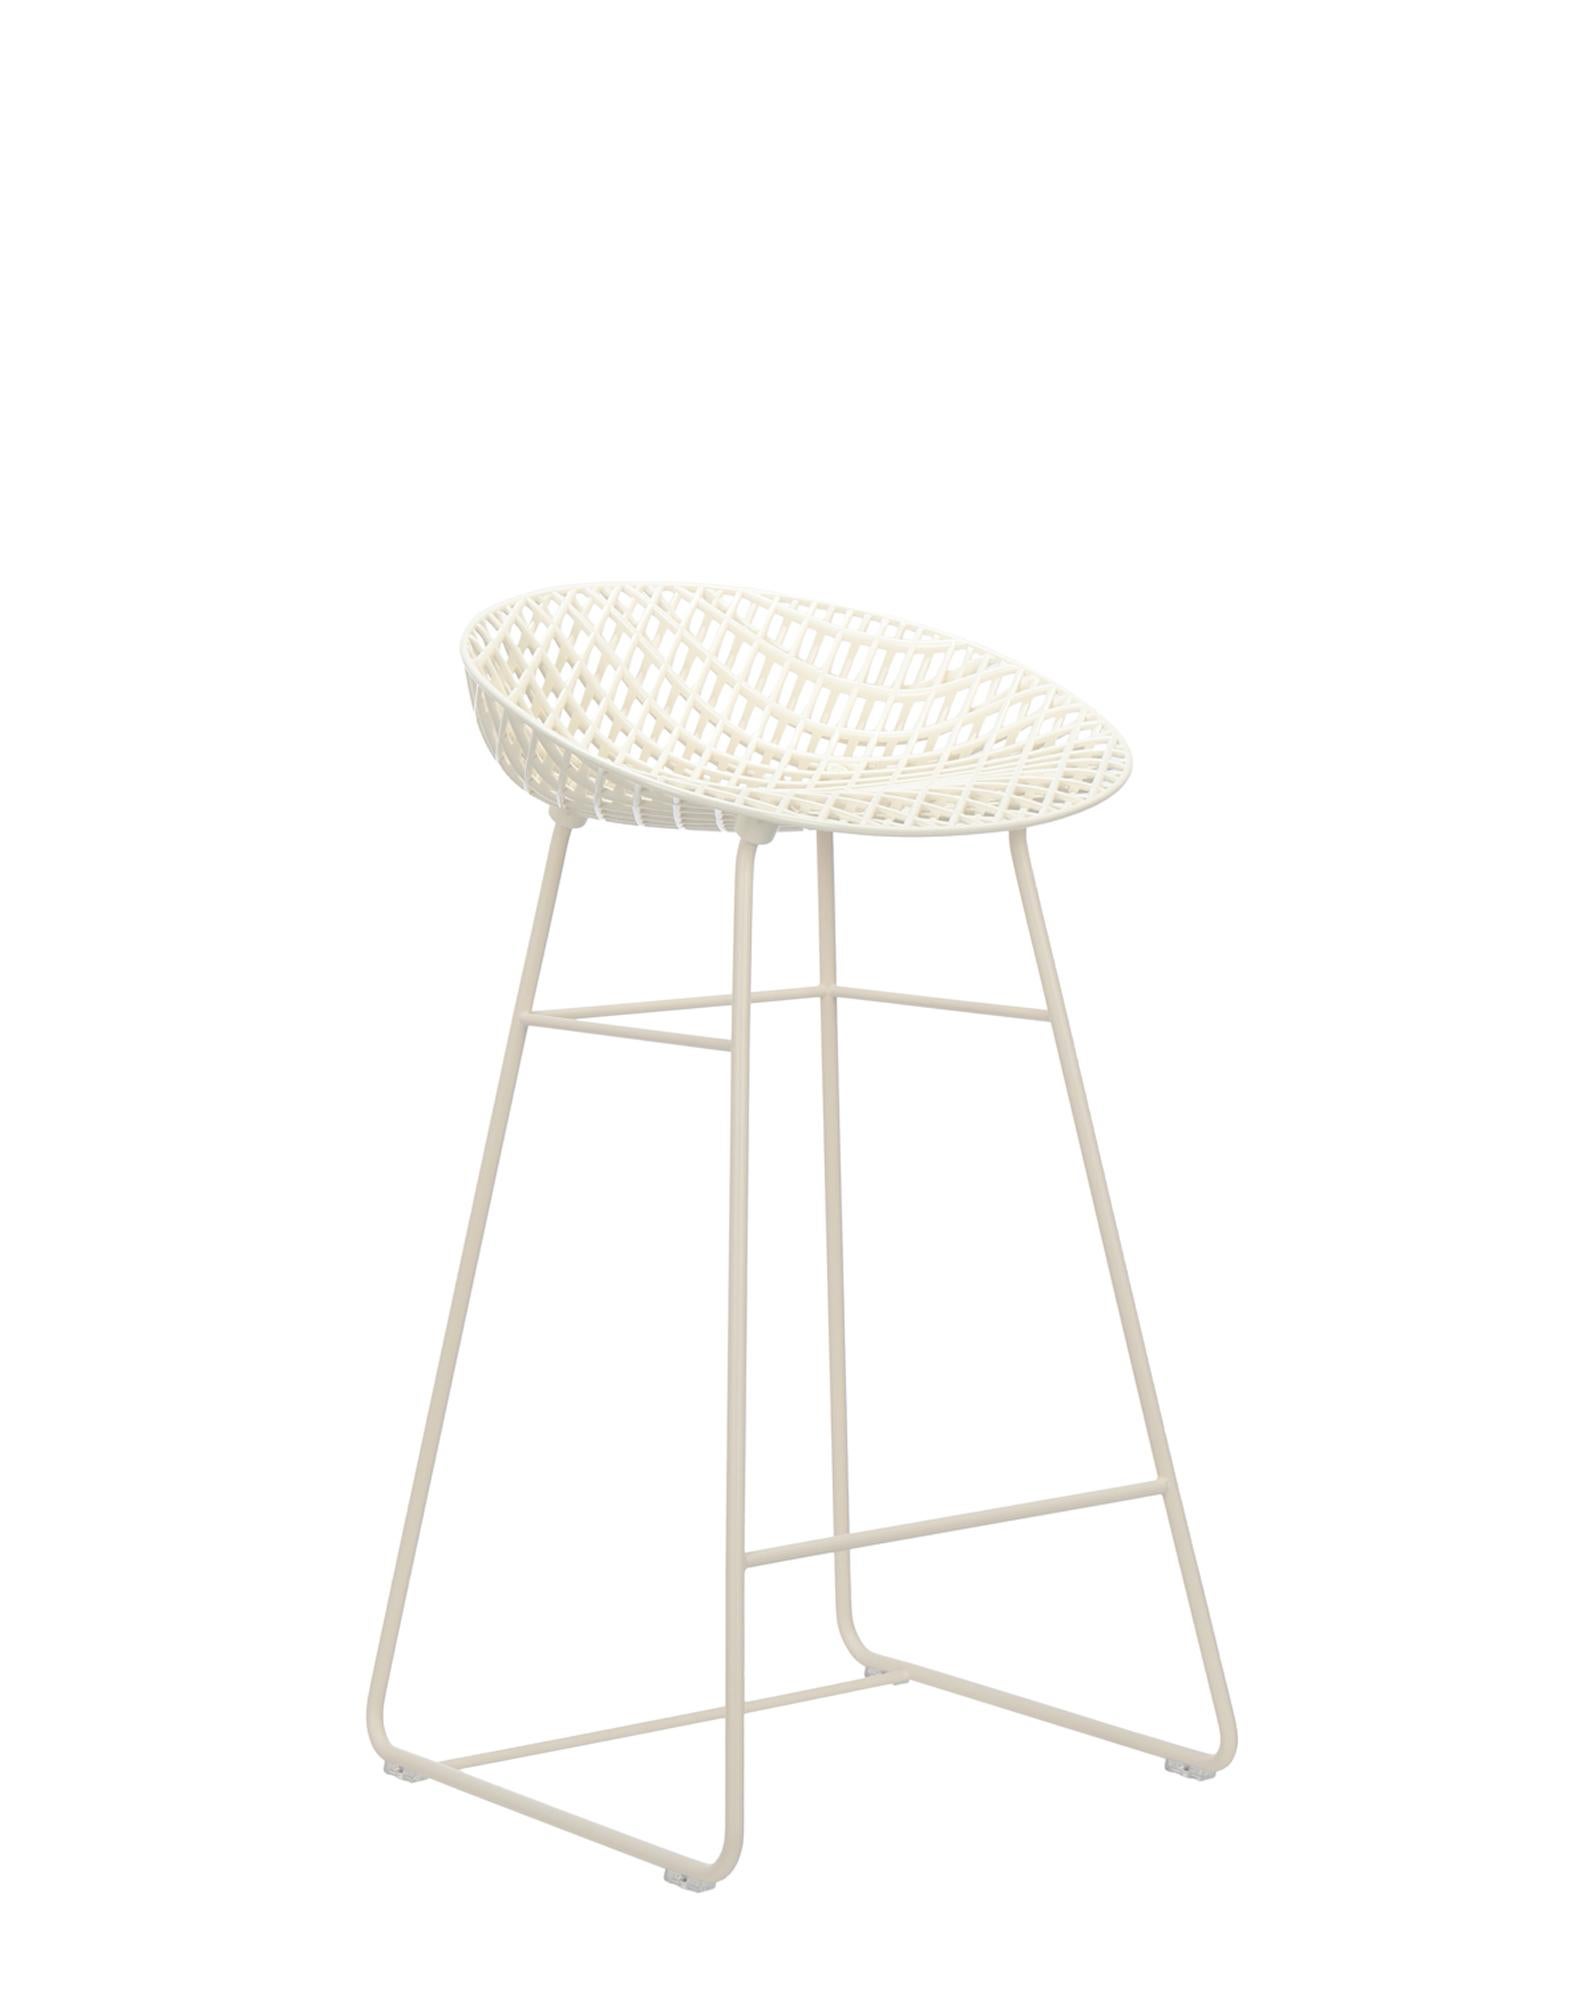 The Smatrik stool joins the family of seats created by Tokujin Yoshioka and is crafted using a mould which enables the recreation of a 3D net that overlaps and crosses over.Thanks to a special injection technology, the layers of transparent or